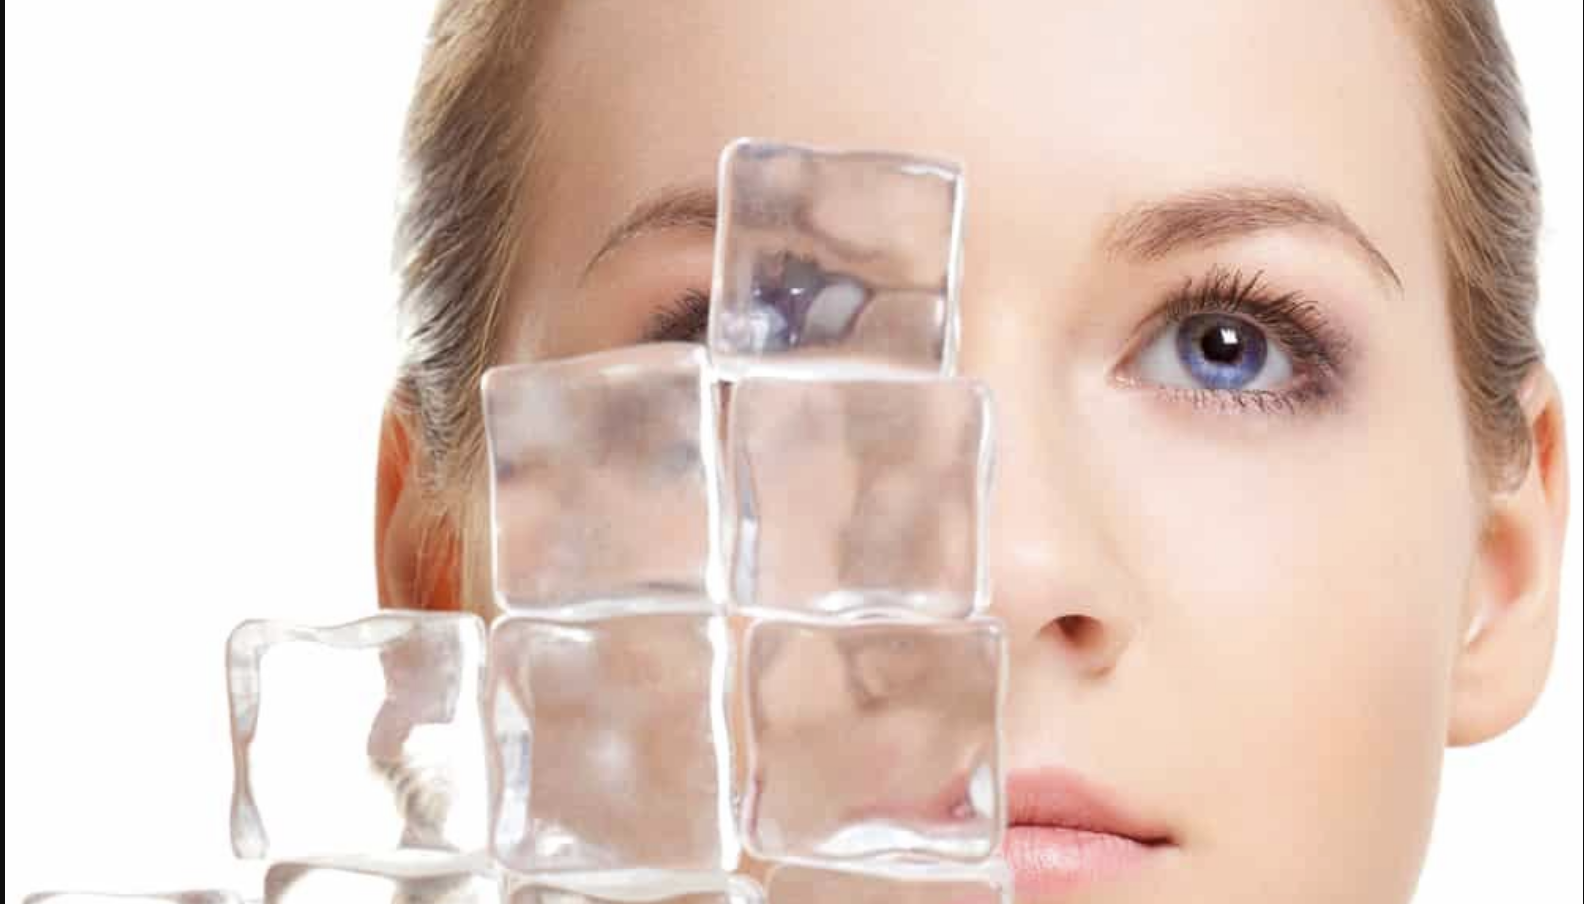 What Are the Benefits of Applying Ice to the Eyes?